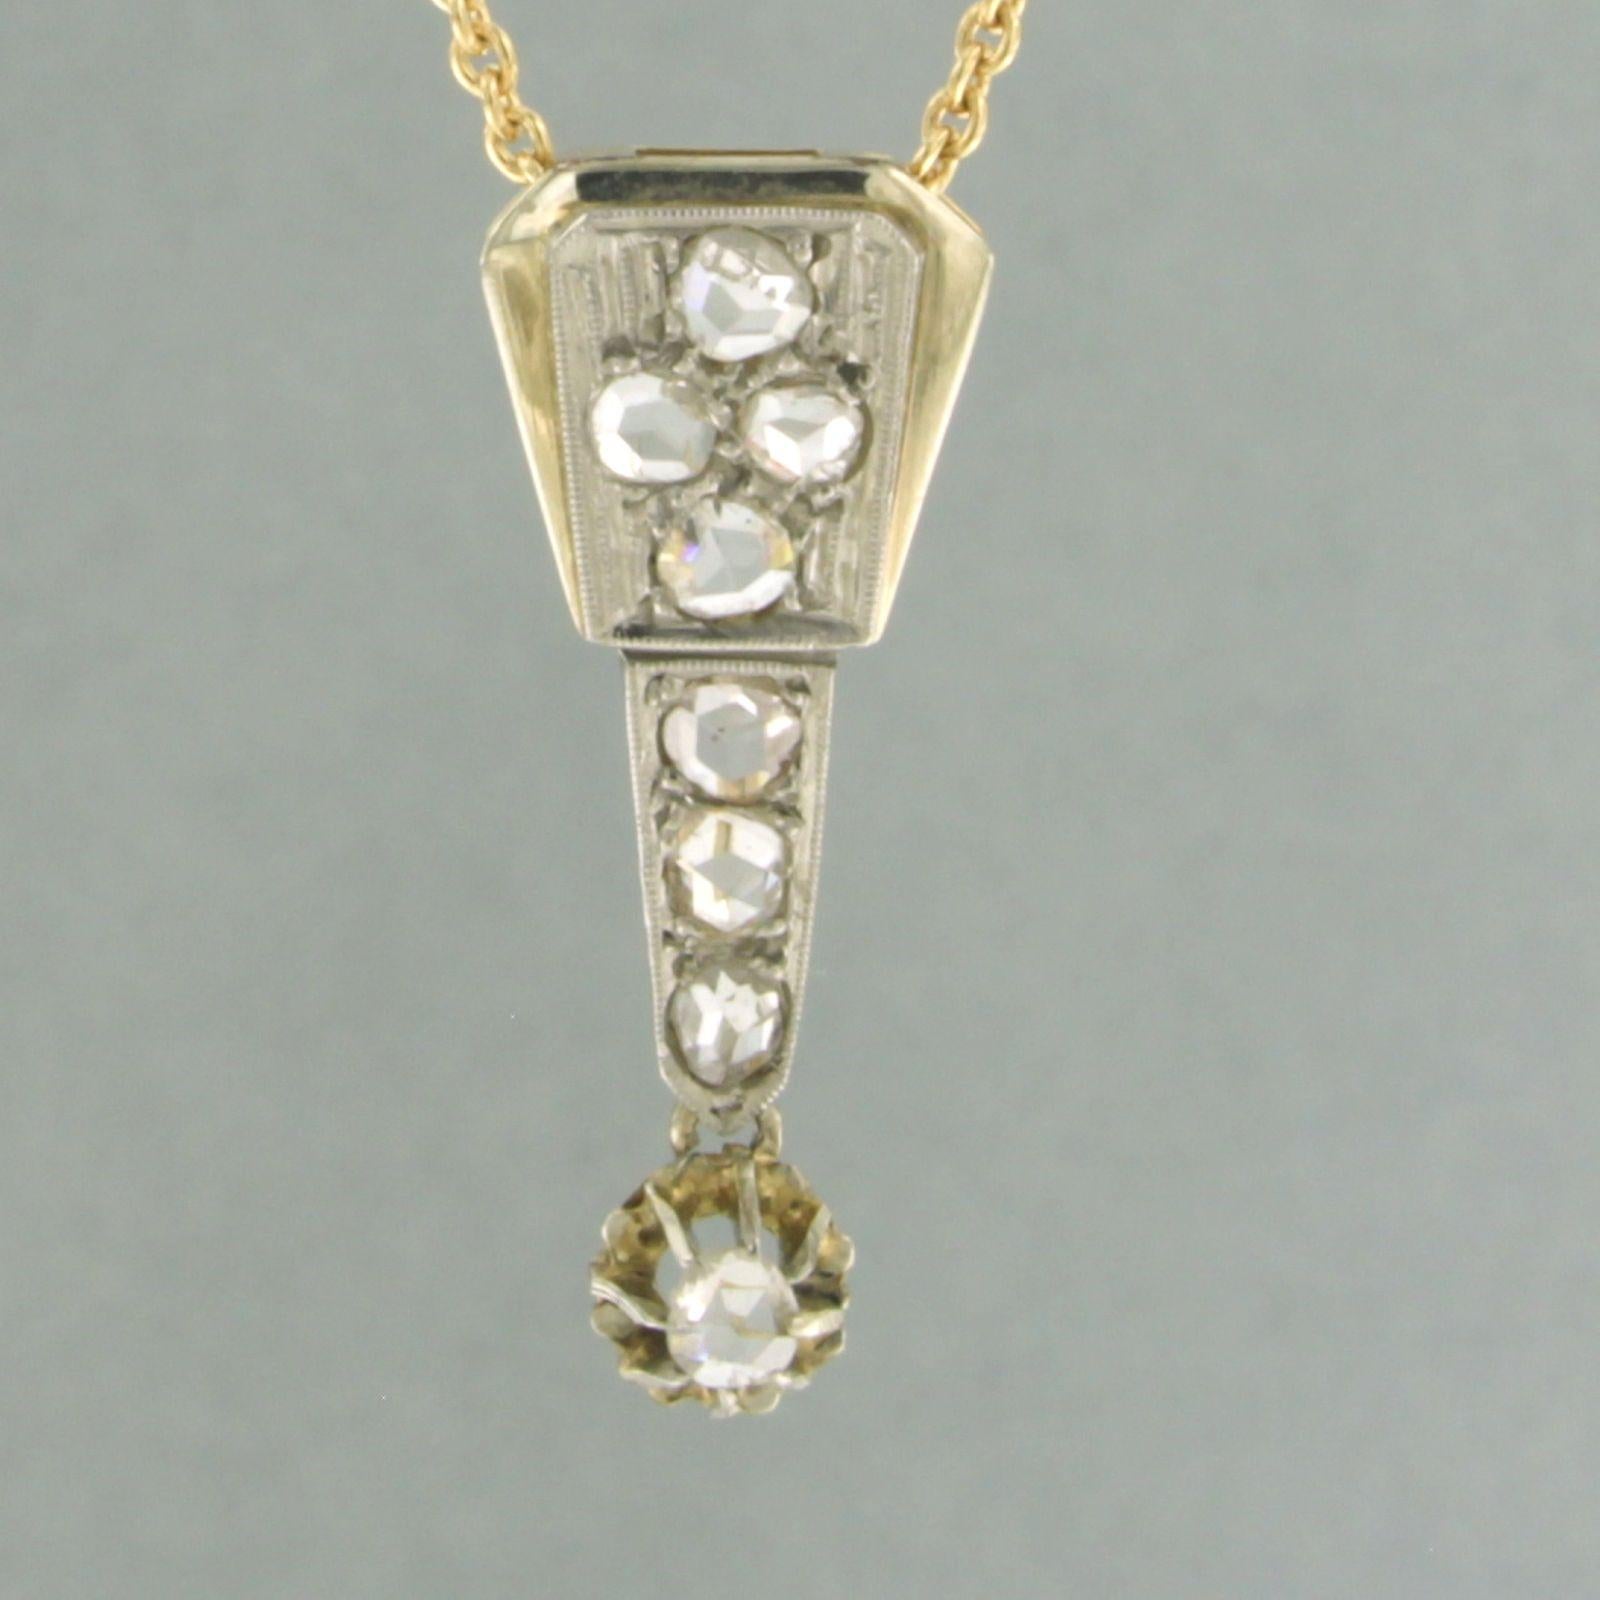 18k yellow gold necklace with 18k gold and 950pt platinum pendant set with rose cut diamond, total approximately 0.20 ct - F/G - SI - 45 cm

detailed description

the length of the necklace is 45 cm long by 0.7 mm wide

the pendant is 2.6 cm high